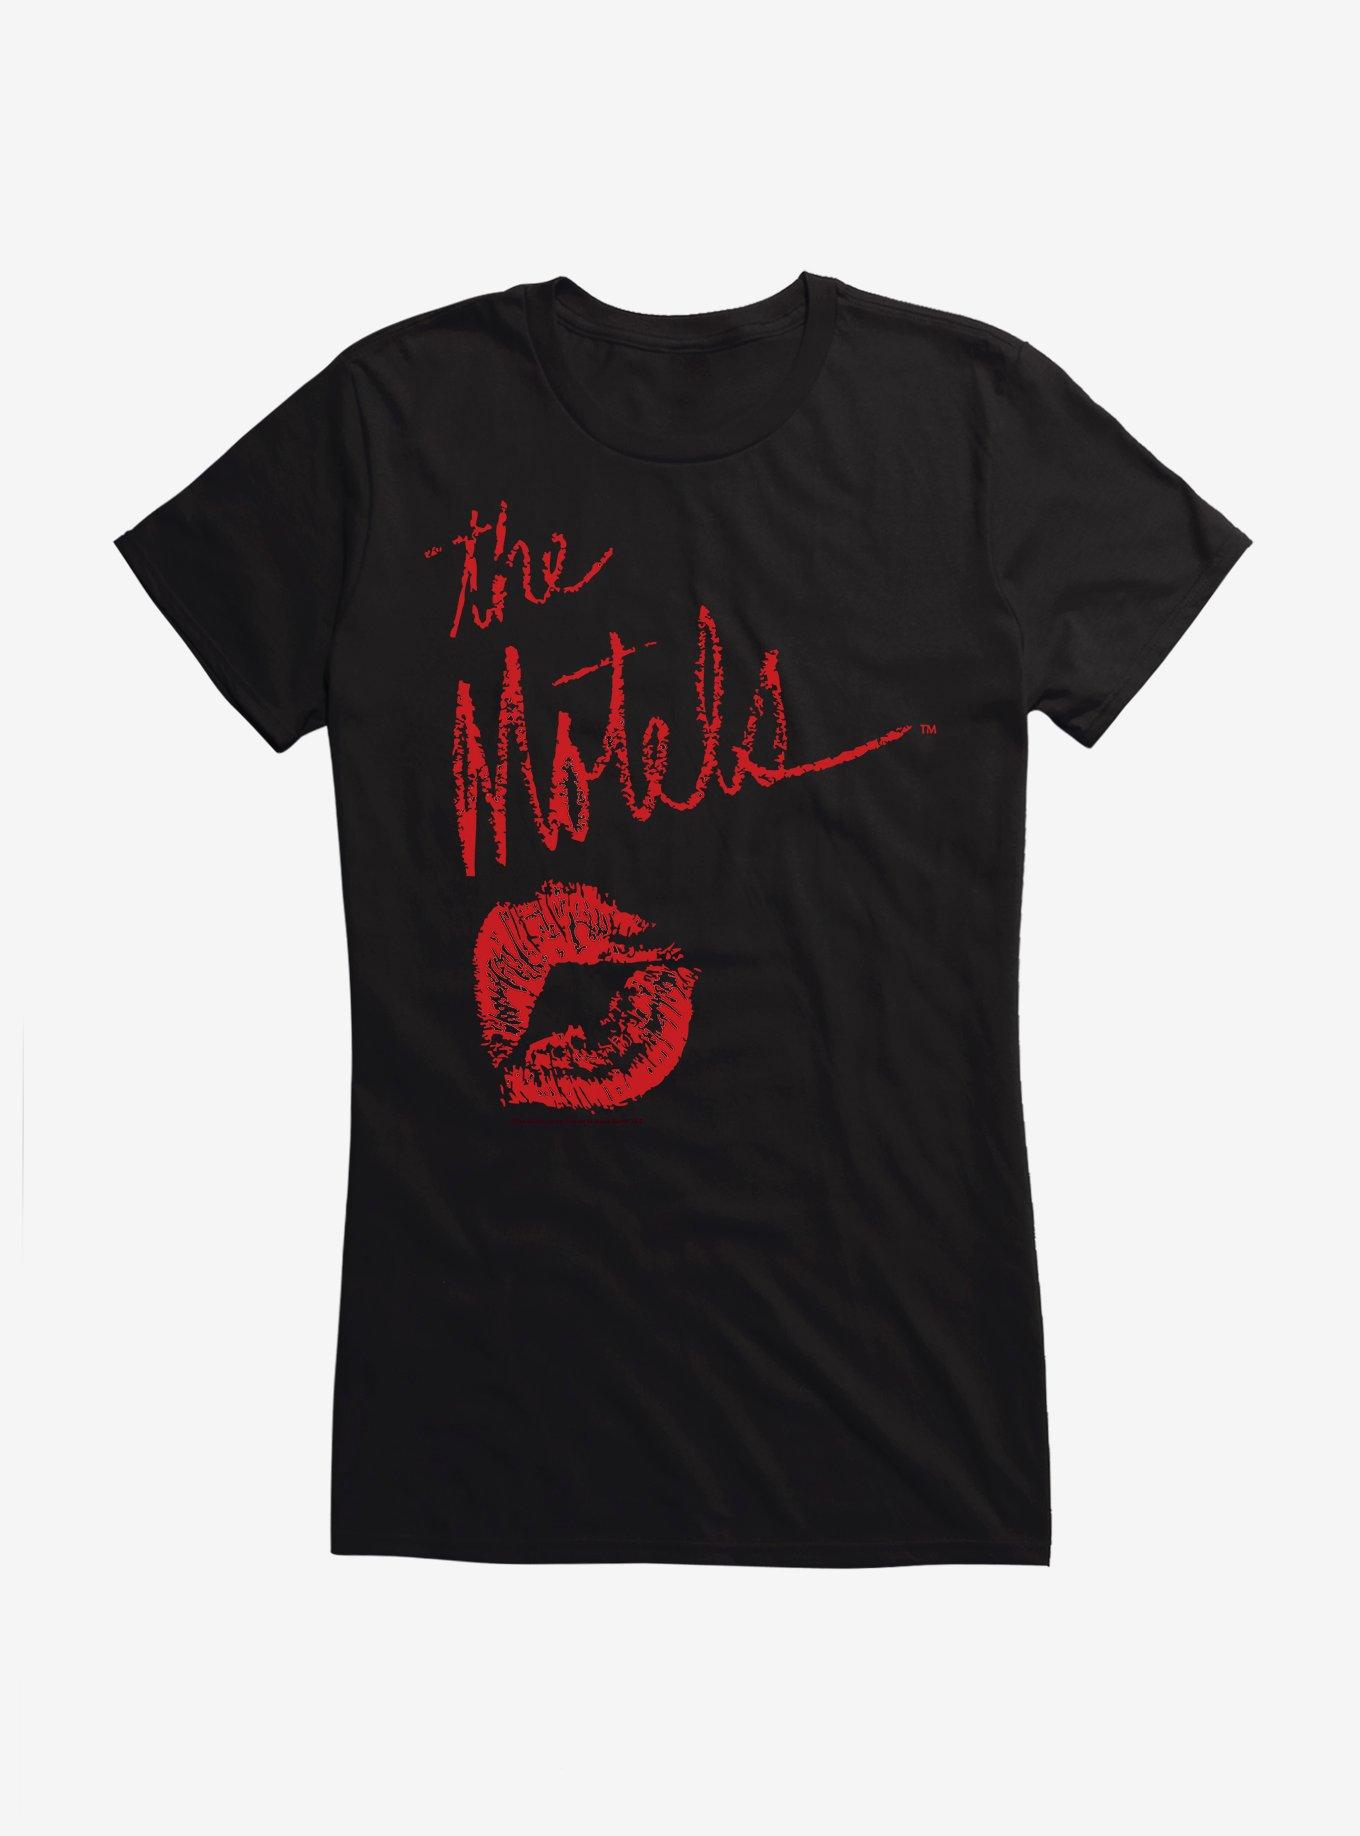 The Motels Red Lips Girls T-Shirt